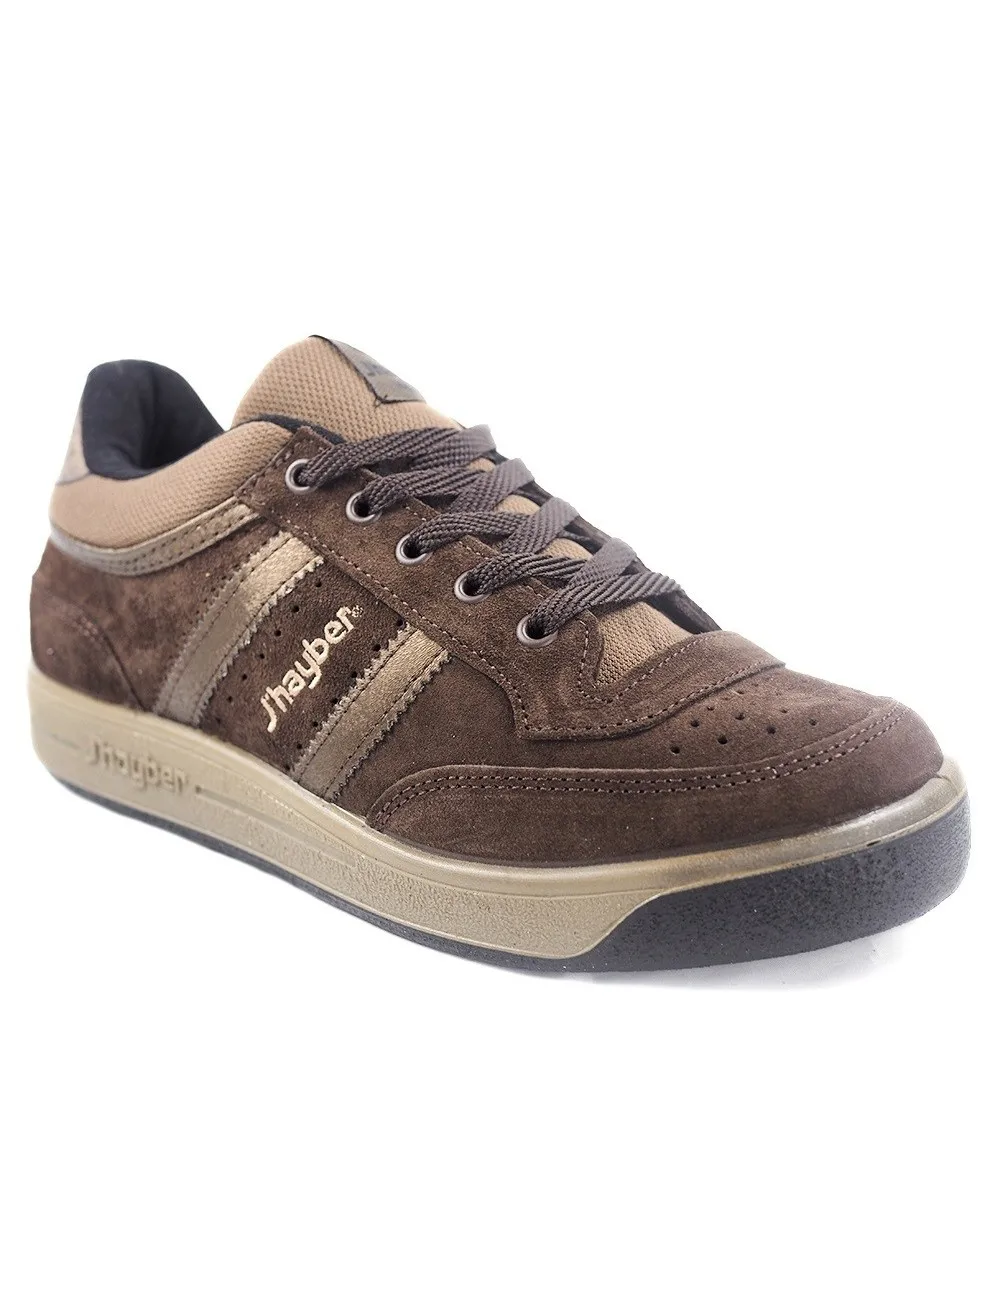 J' Hayber New Olympus sport in brown leather made with textile lining, mens  sneakers|Men's Casual Shoes| - AliExpress